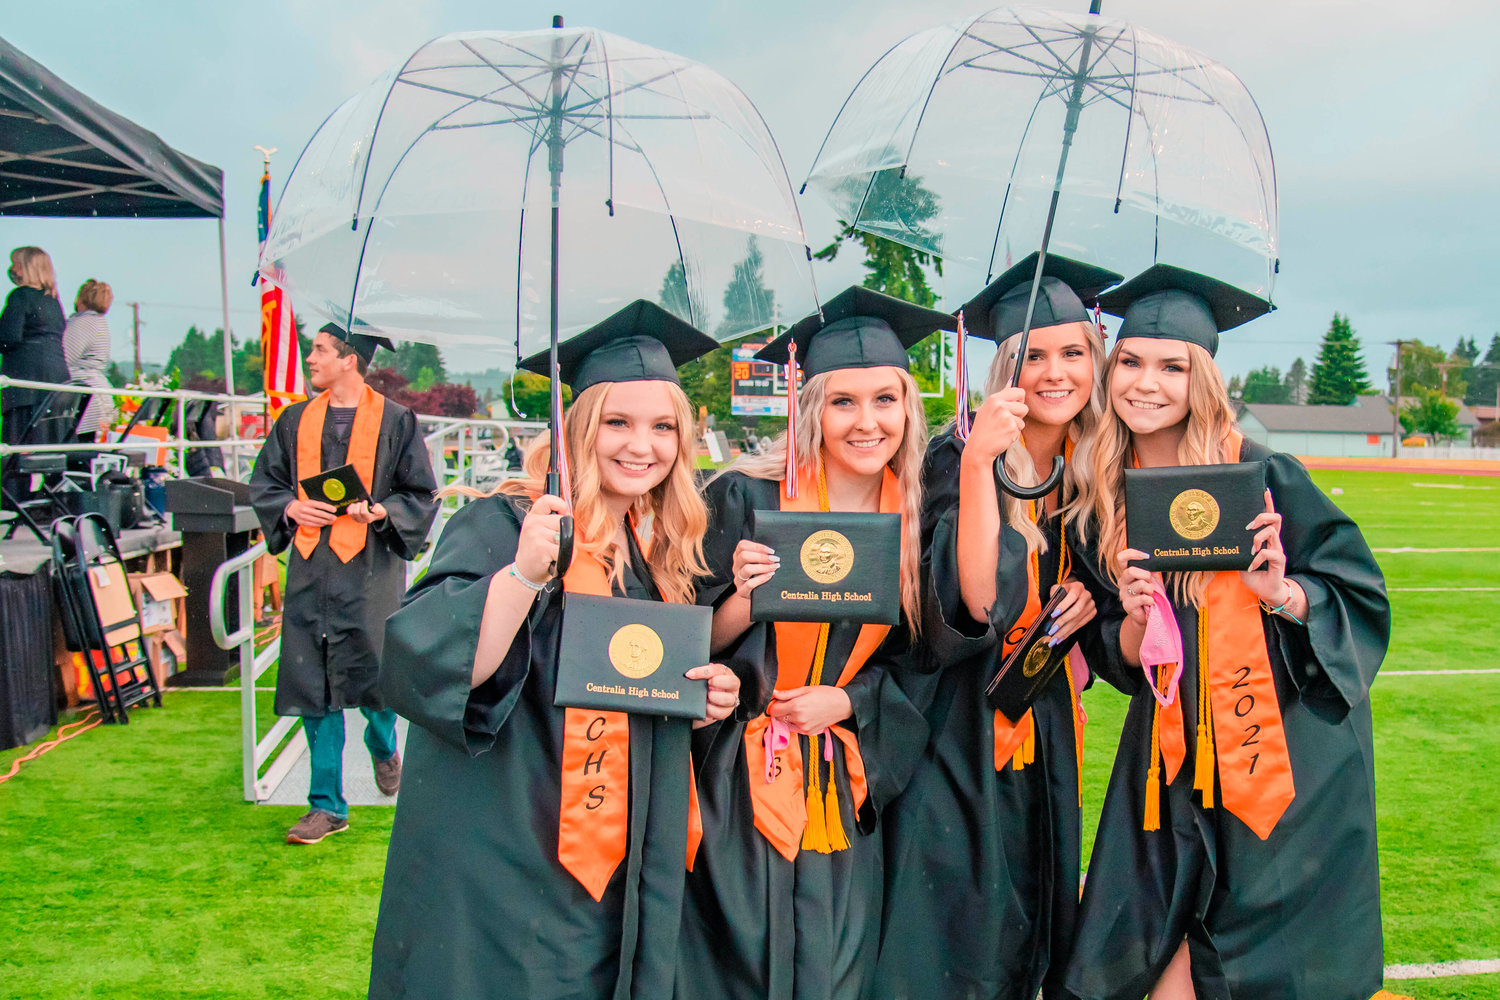 Graduates smile while holding umbrellas over their diplomas during a ceremony at Tiger Stadium in Centralia Friday night.